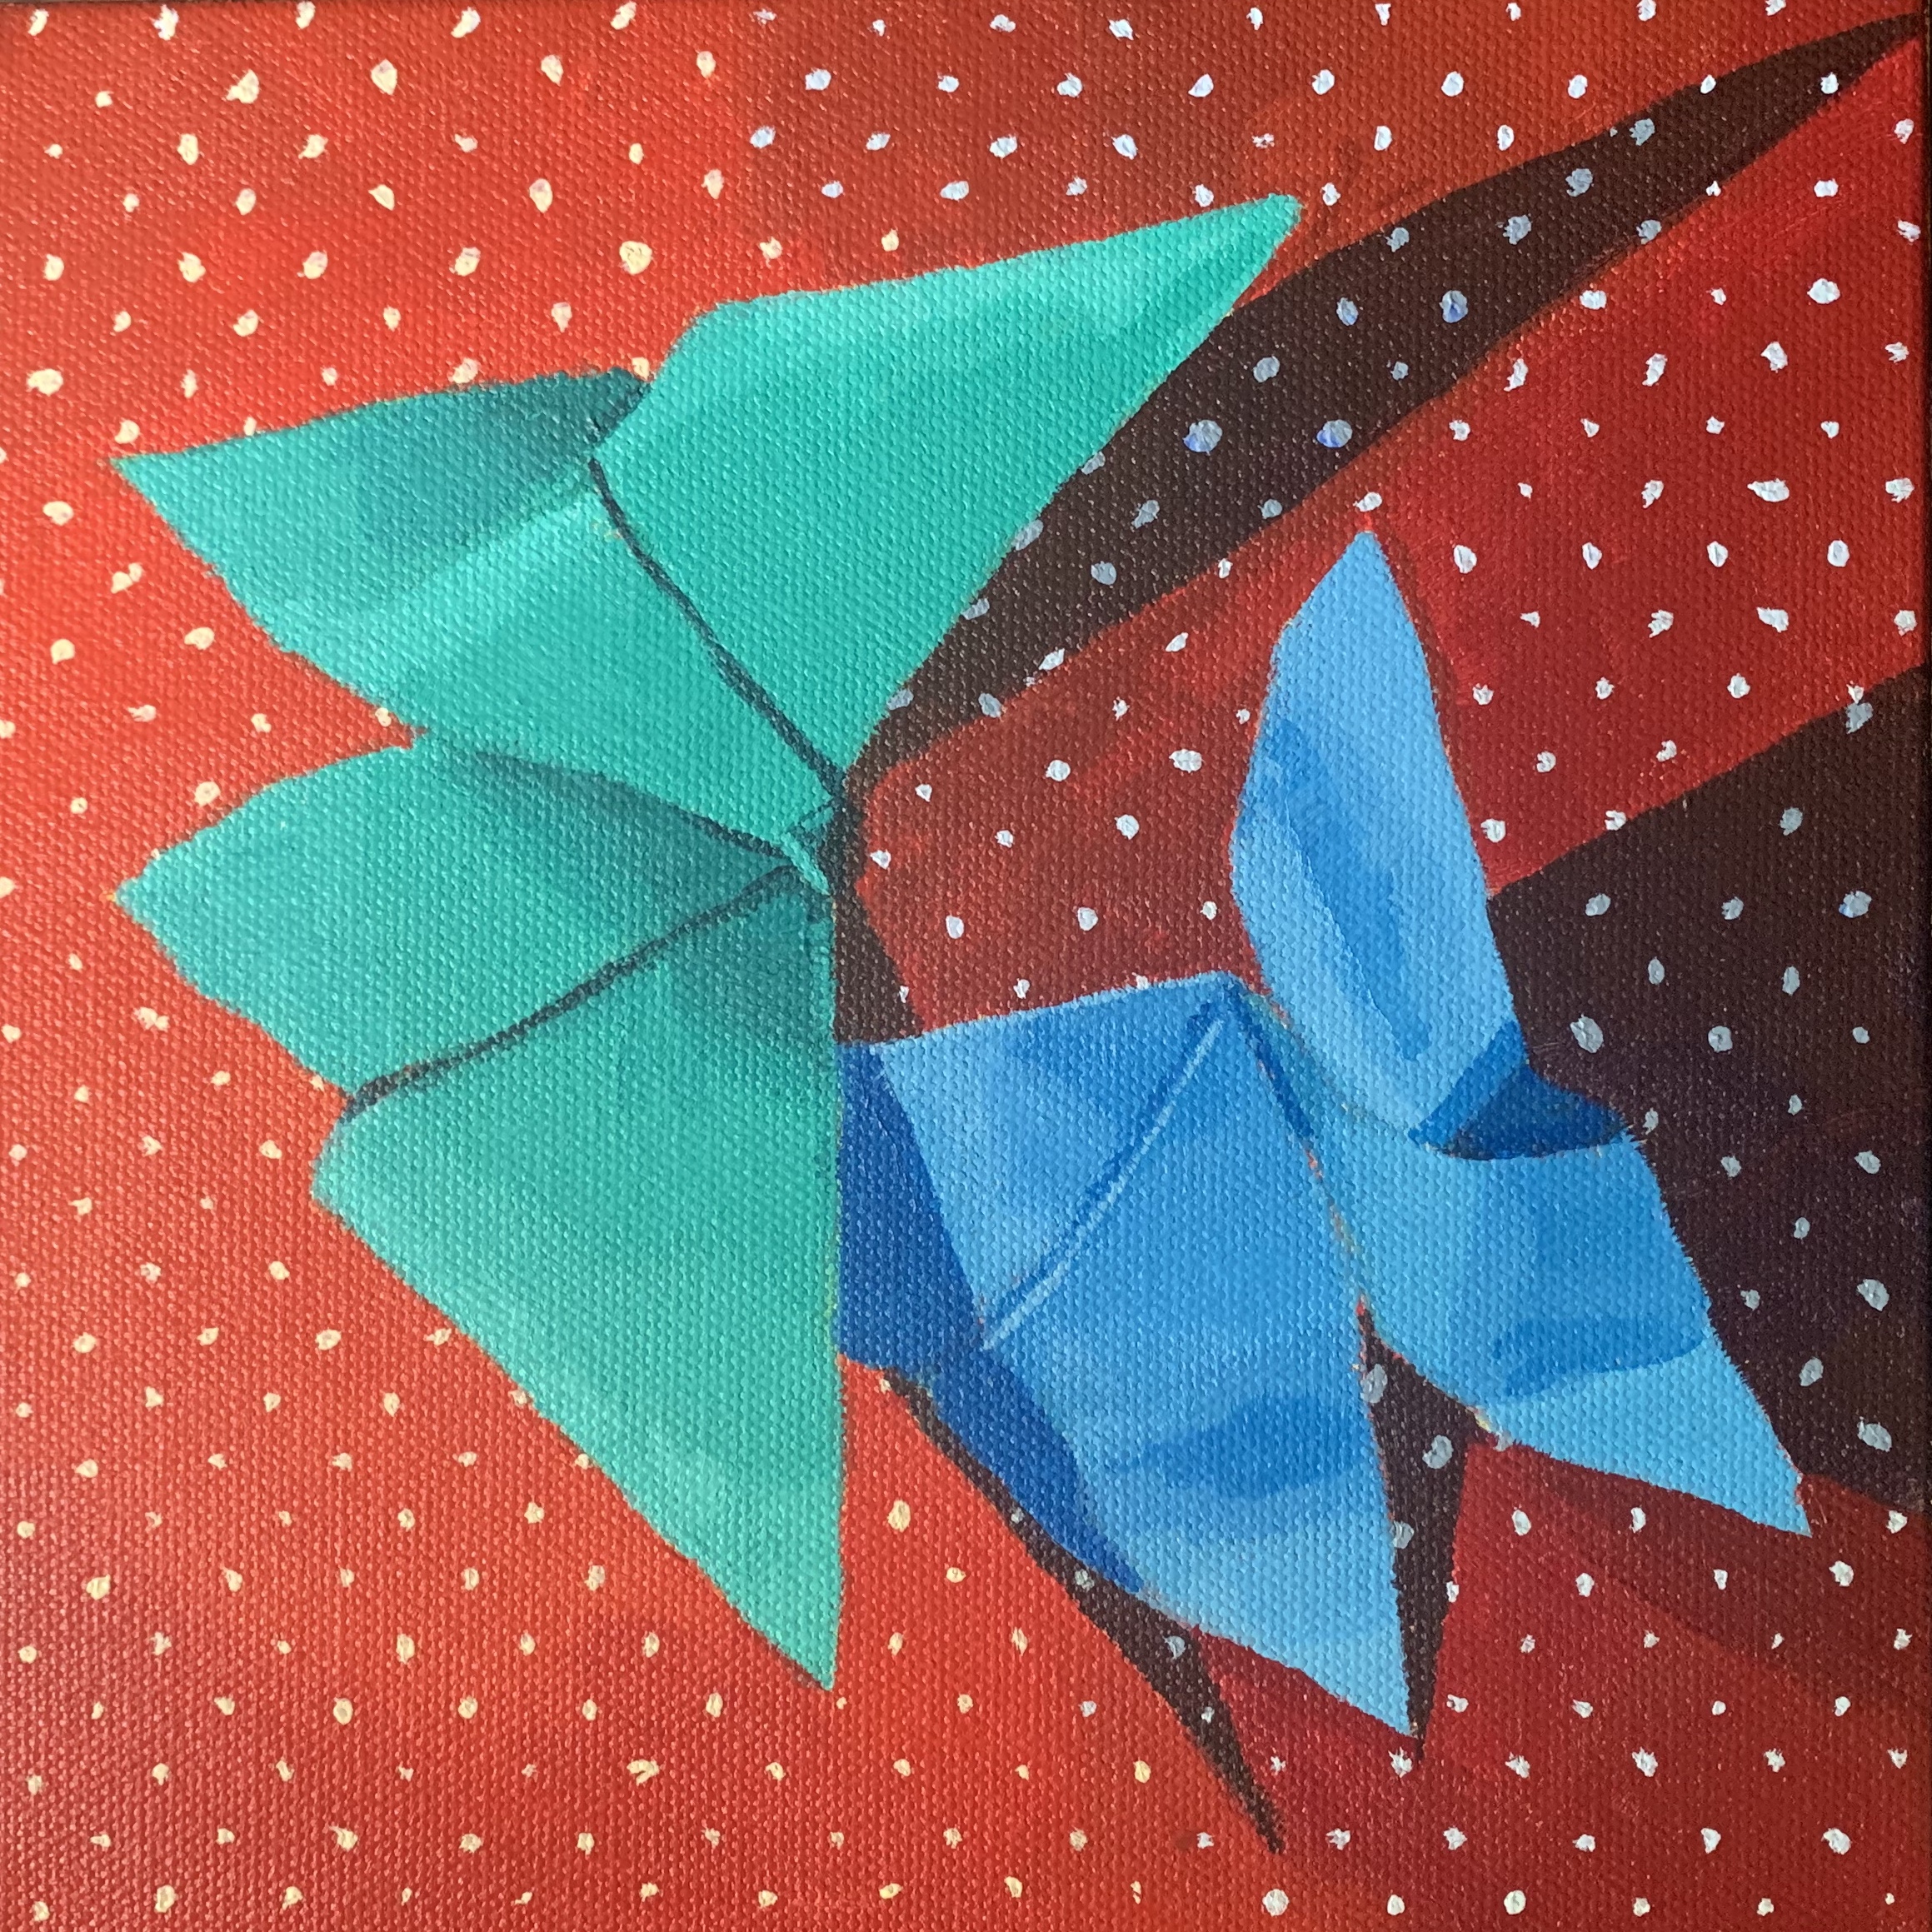 origami butterflies, butterfly painting, leigh ann torres 